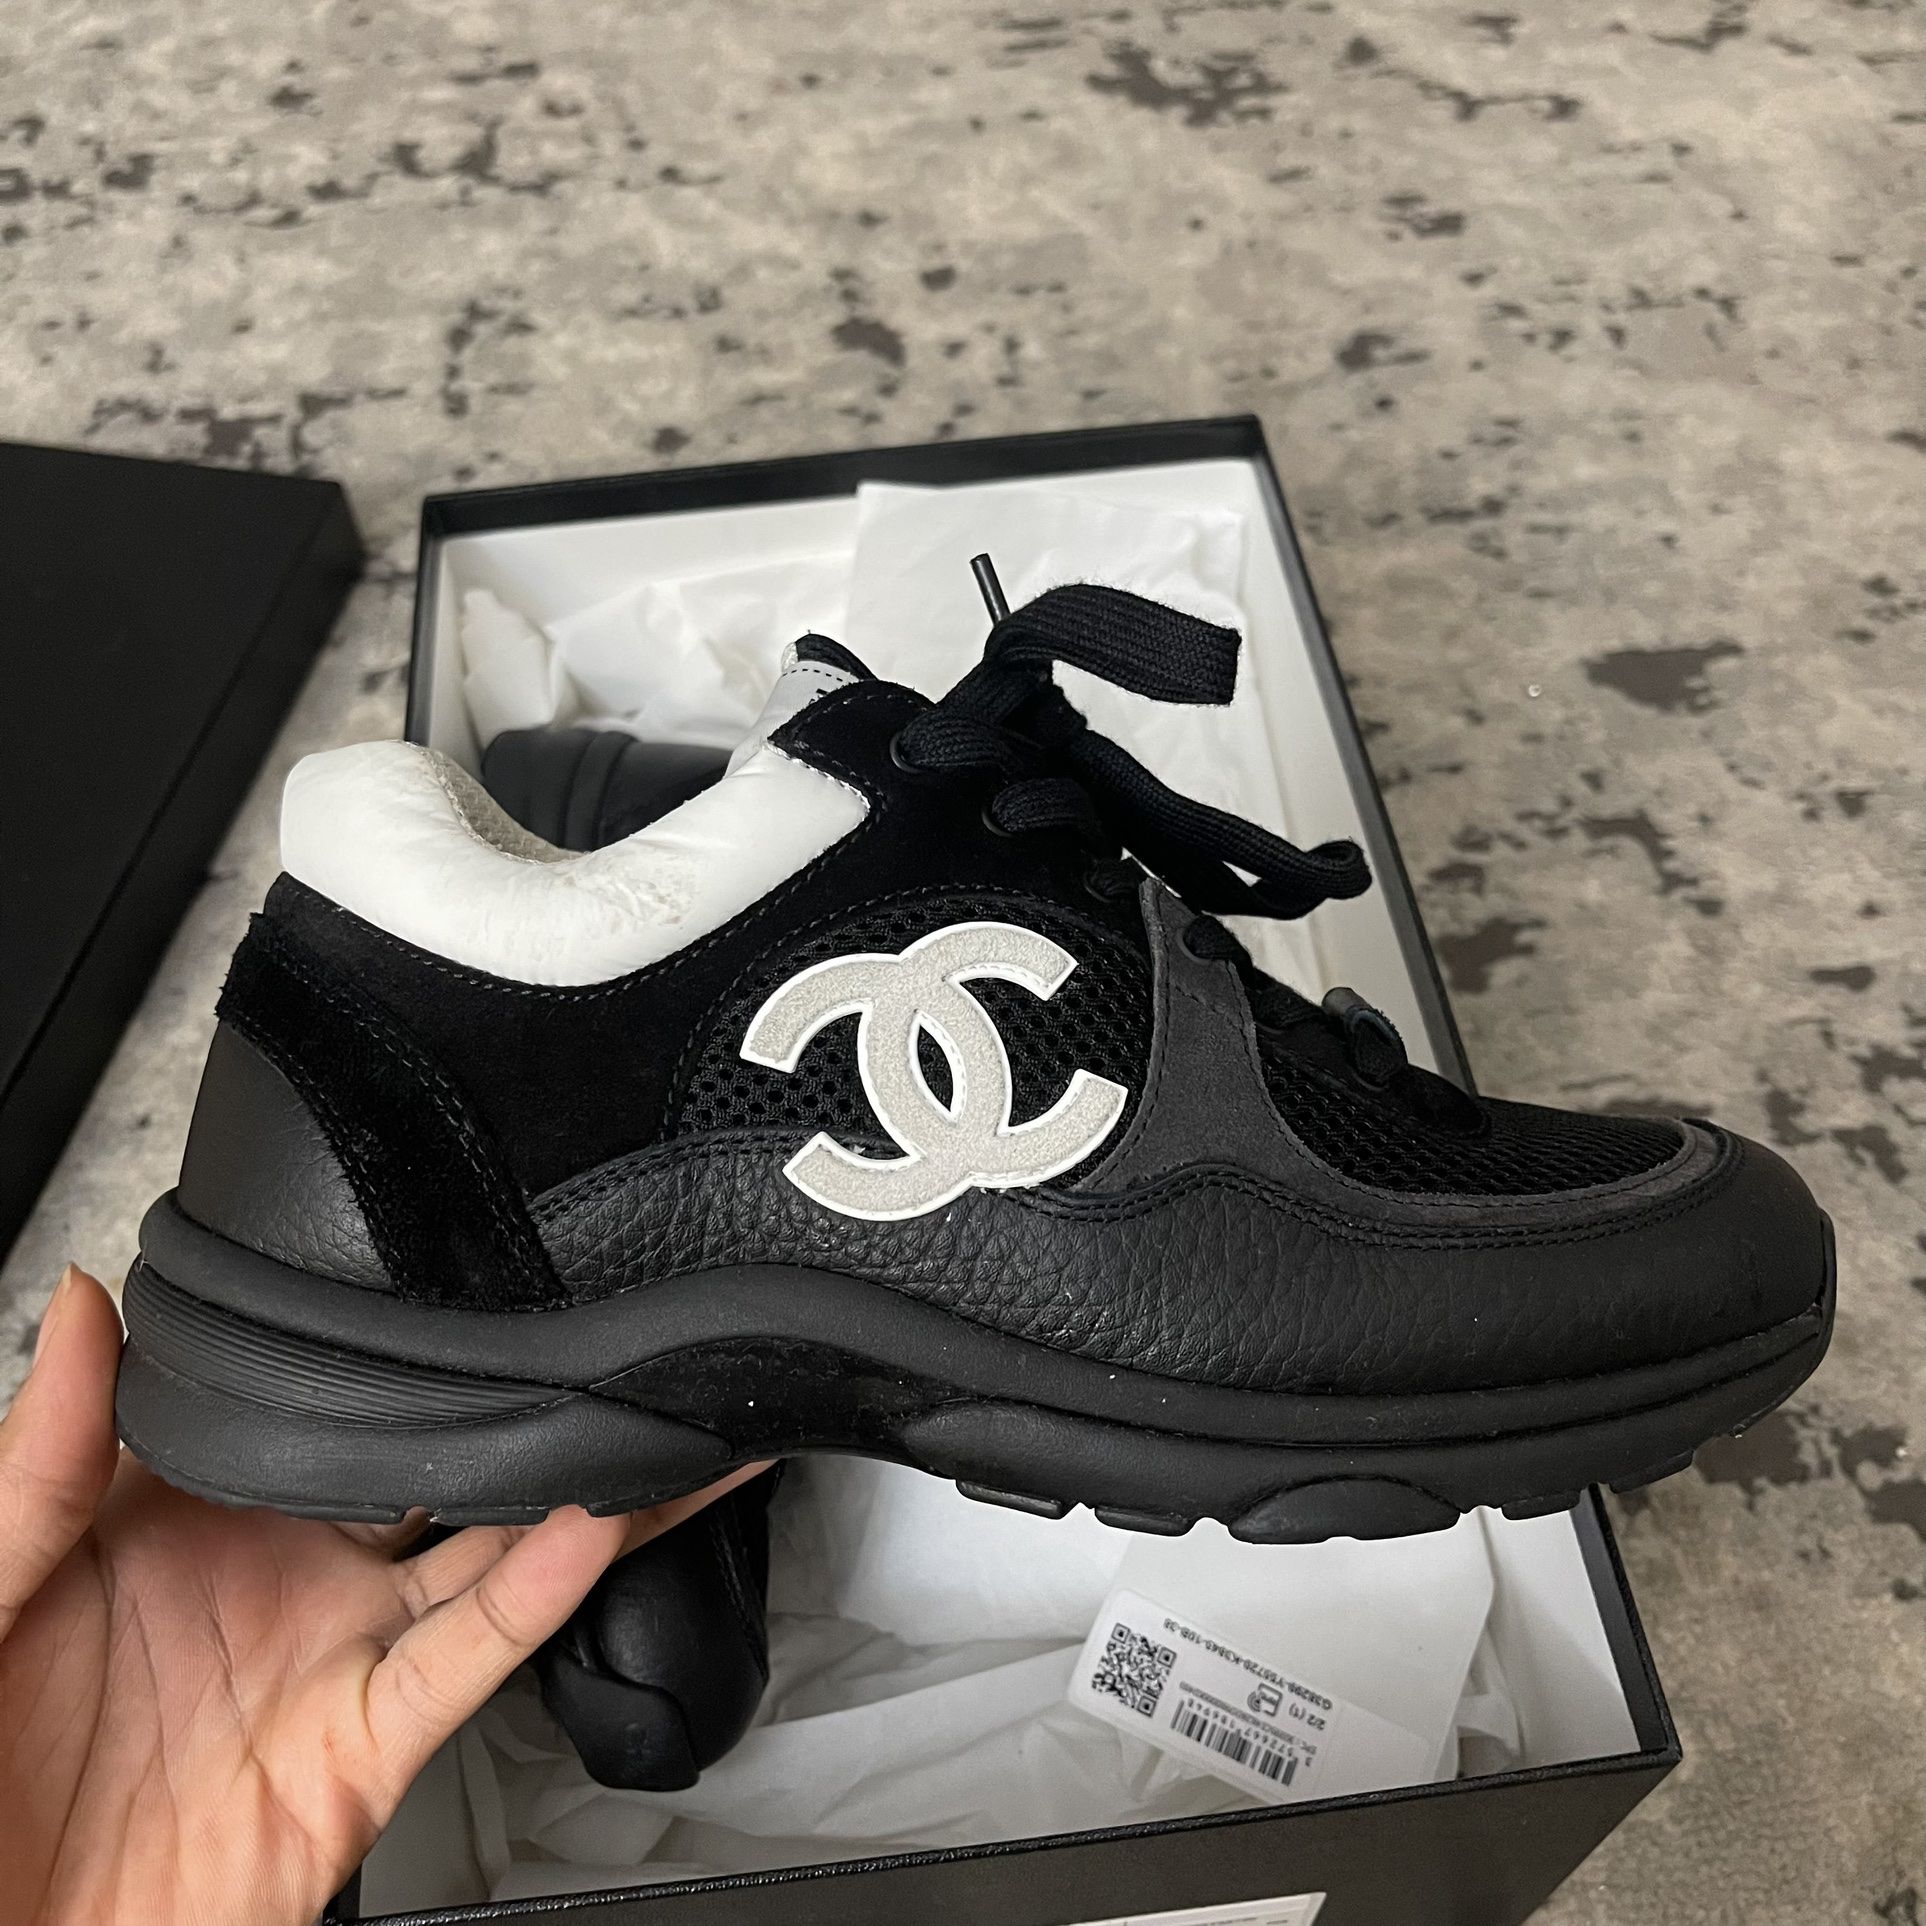 white and black chanel sneakers 38